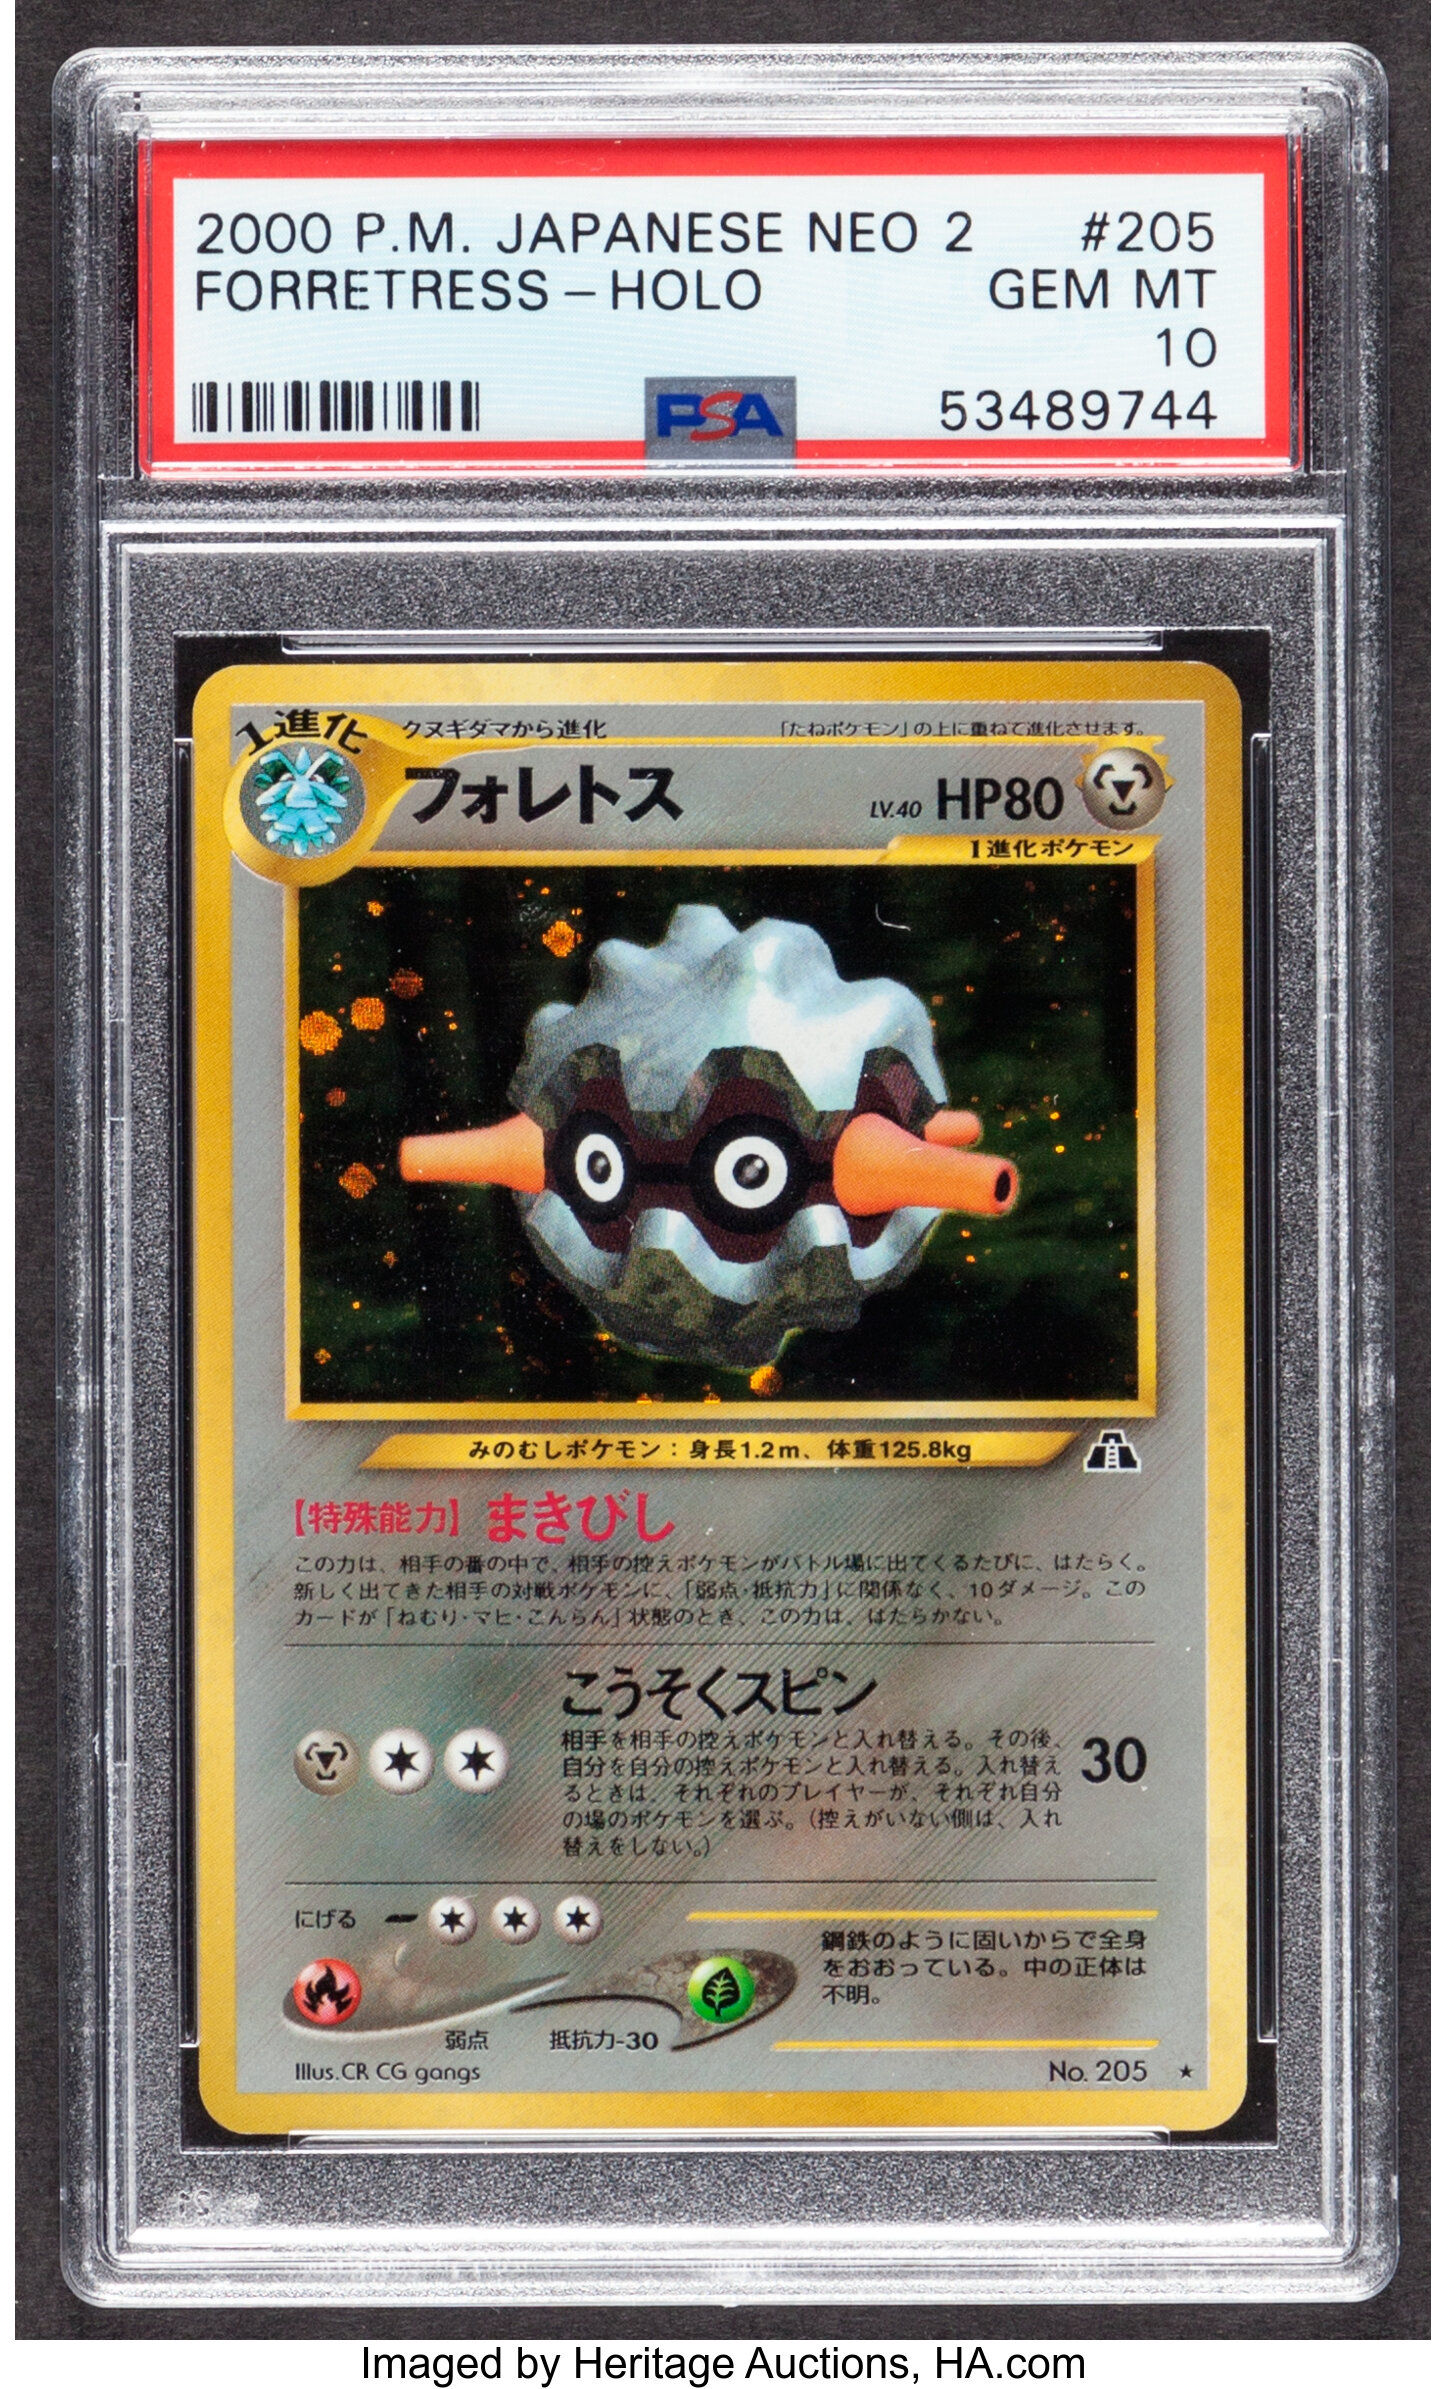 Pokemon Forretress 5 Japanese Neo Discovery Set Trading Card Lot Heritage Auctions